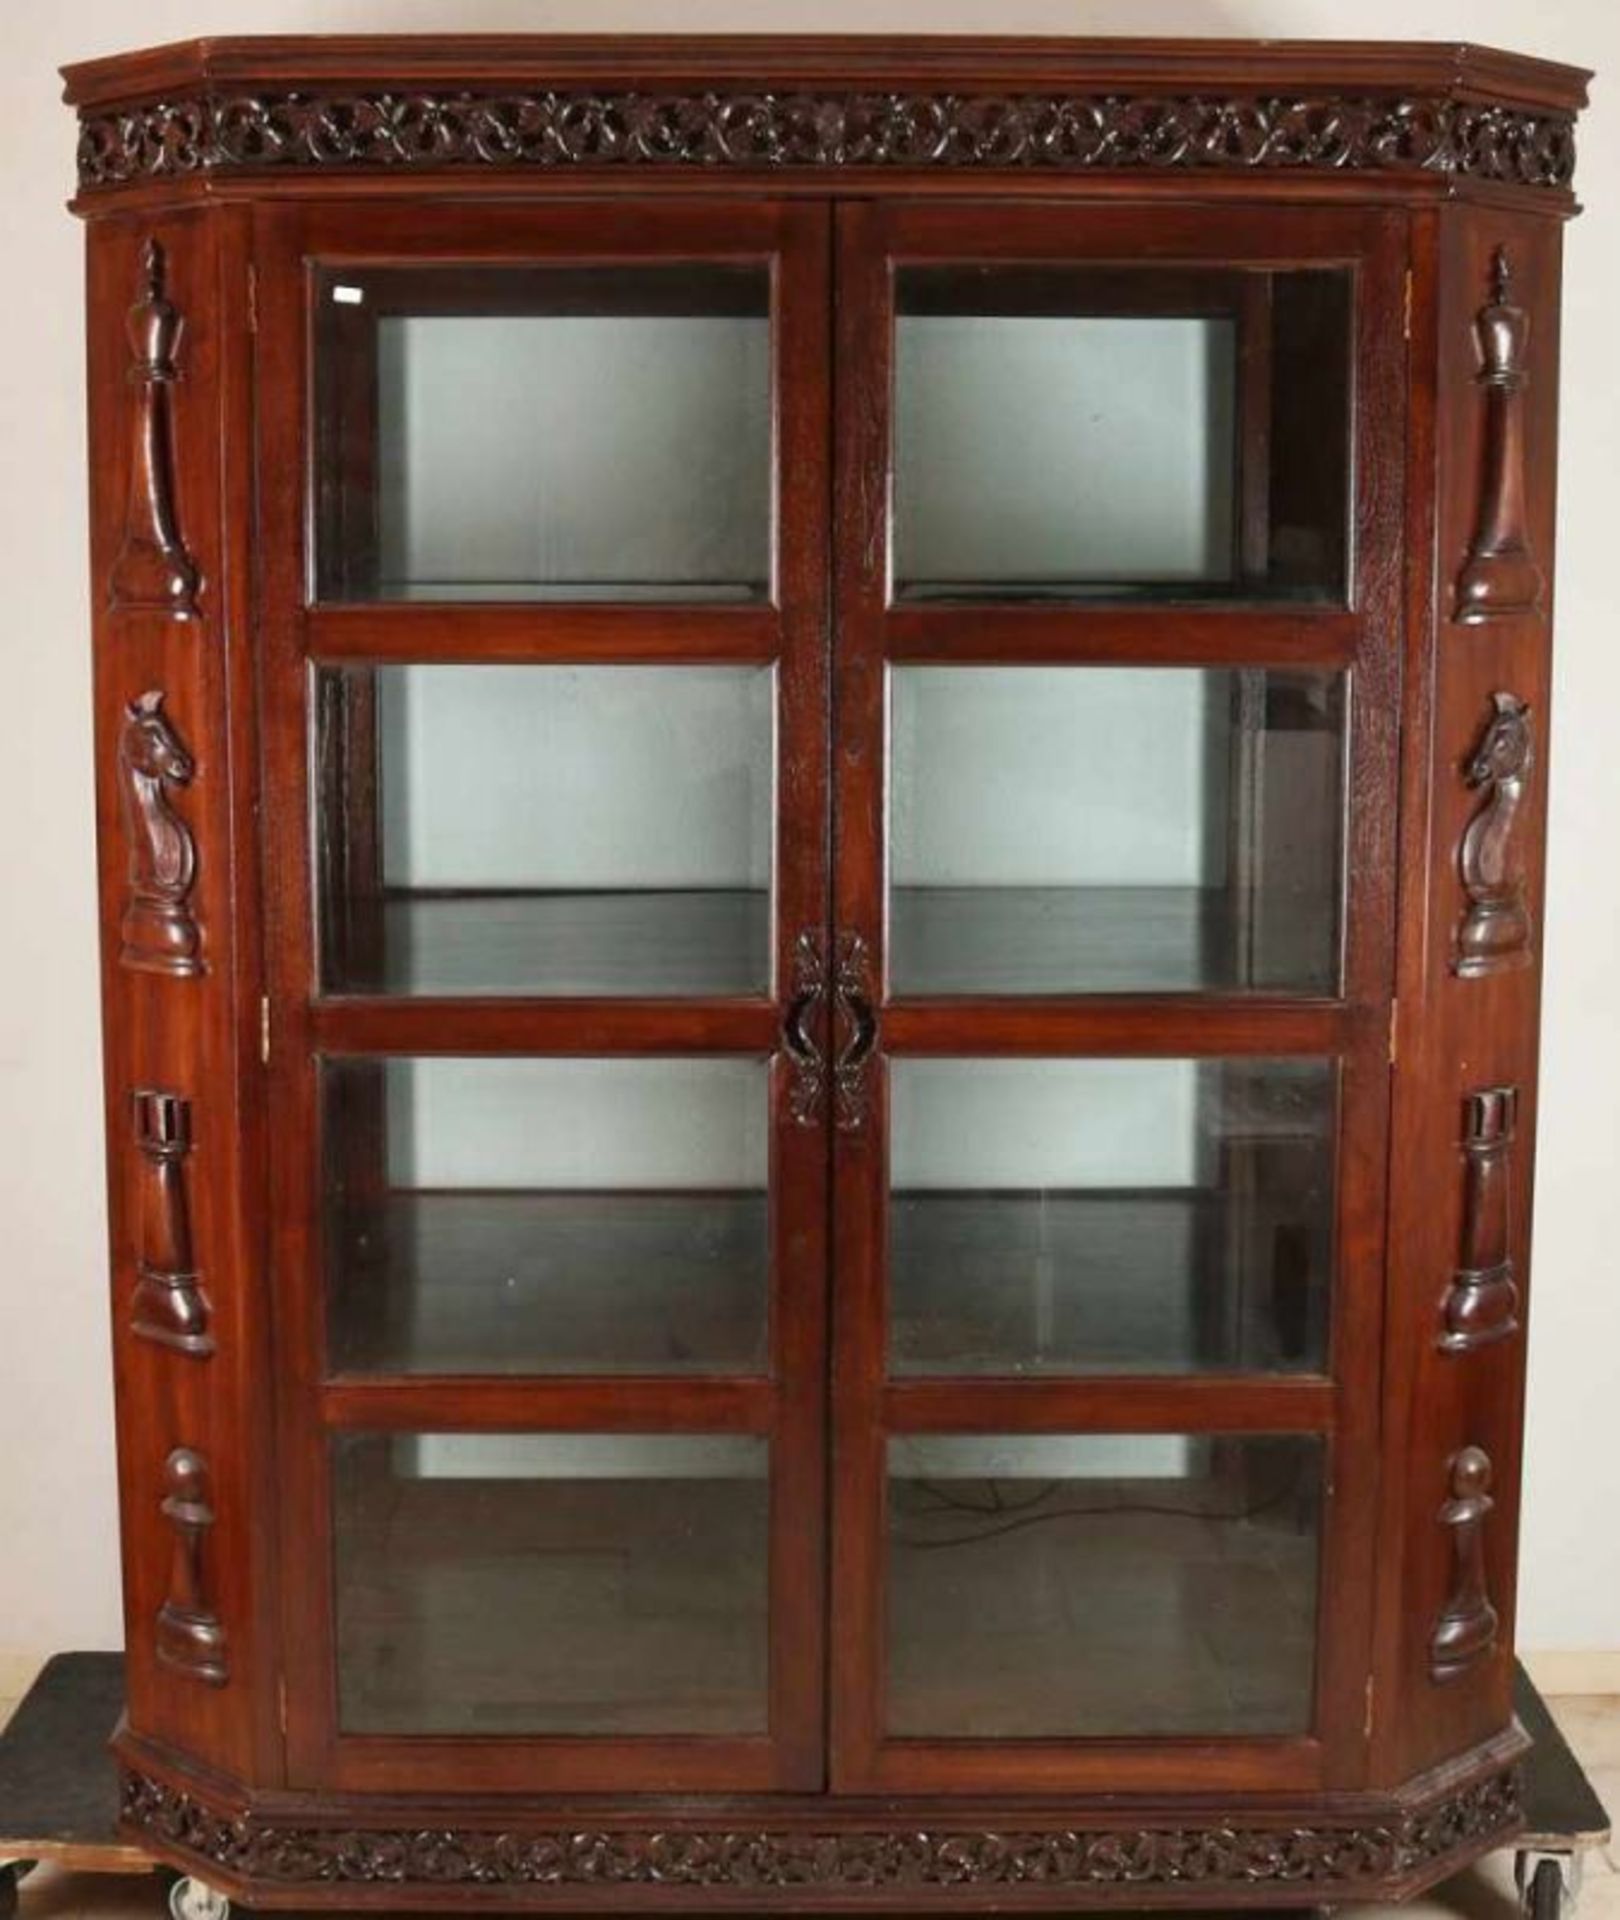 Octagonal teak two-door display cabinet with faceted glass and chess pieces cut figures. Second half